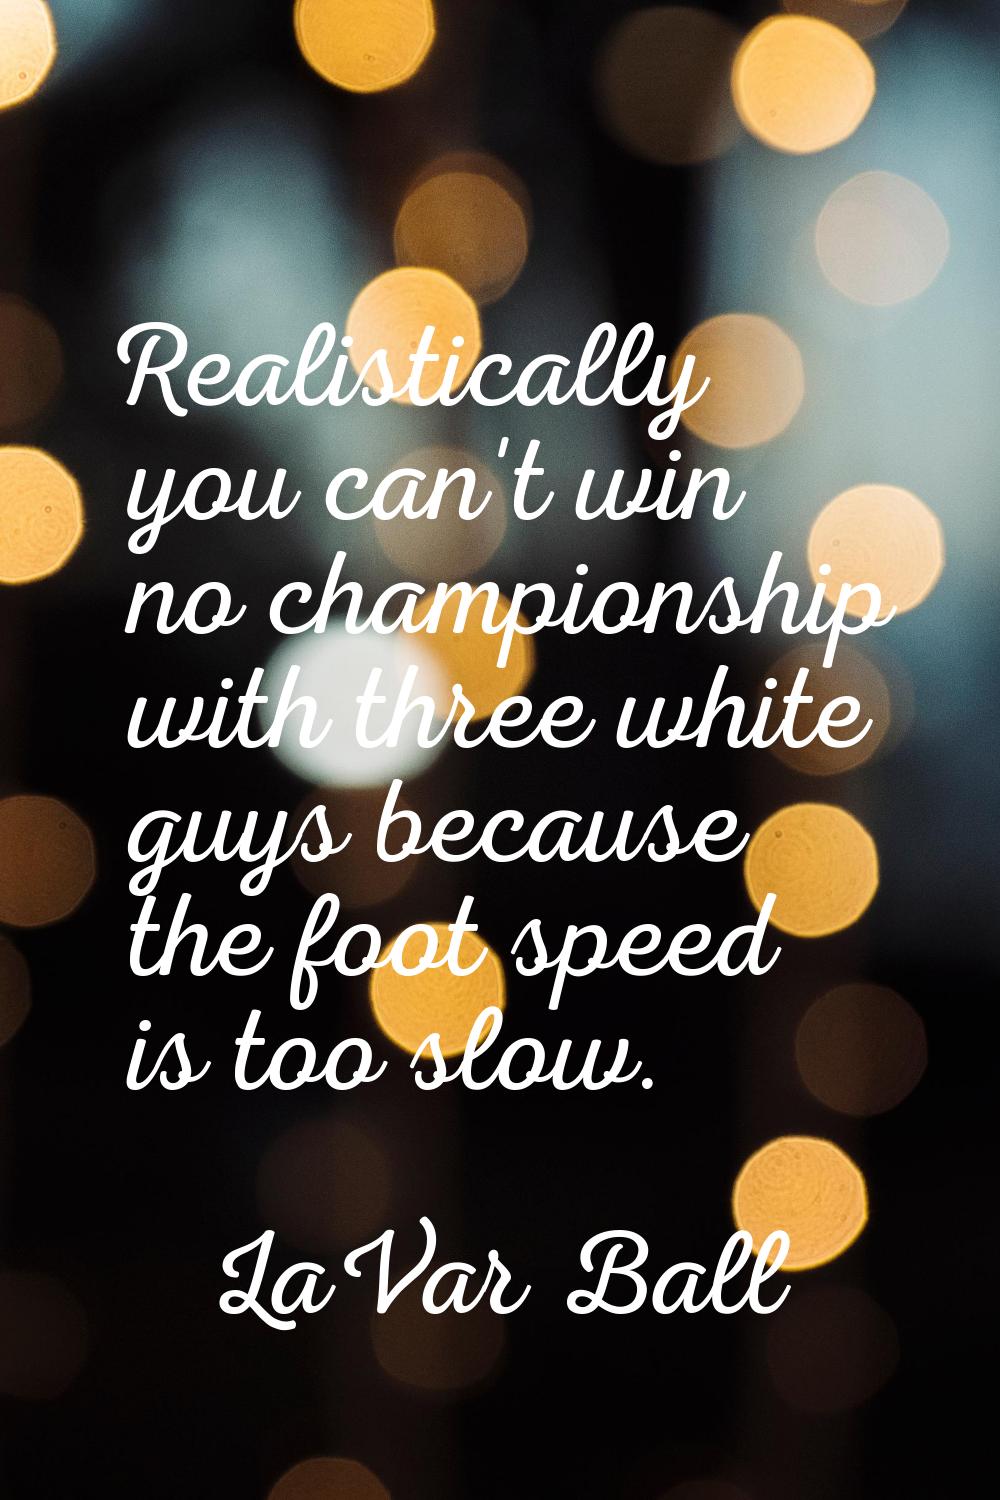 Realistically you can't win no championship with three white guys because the foot speed is too slo